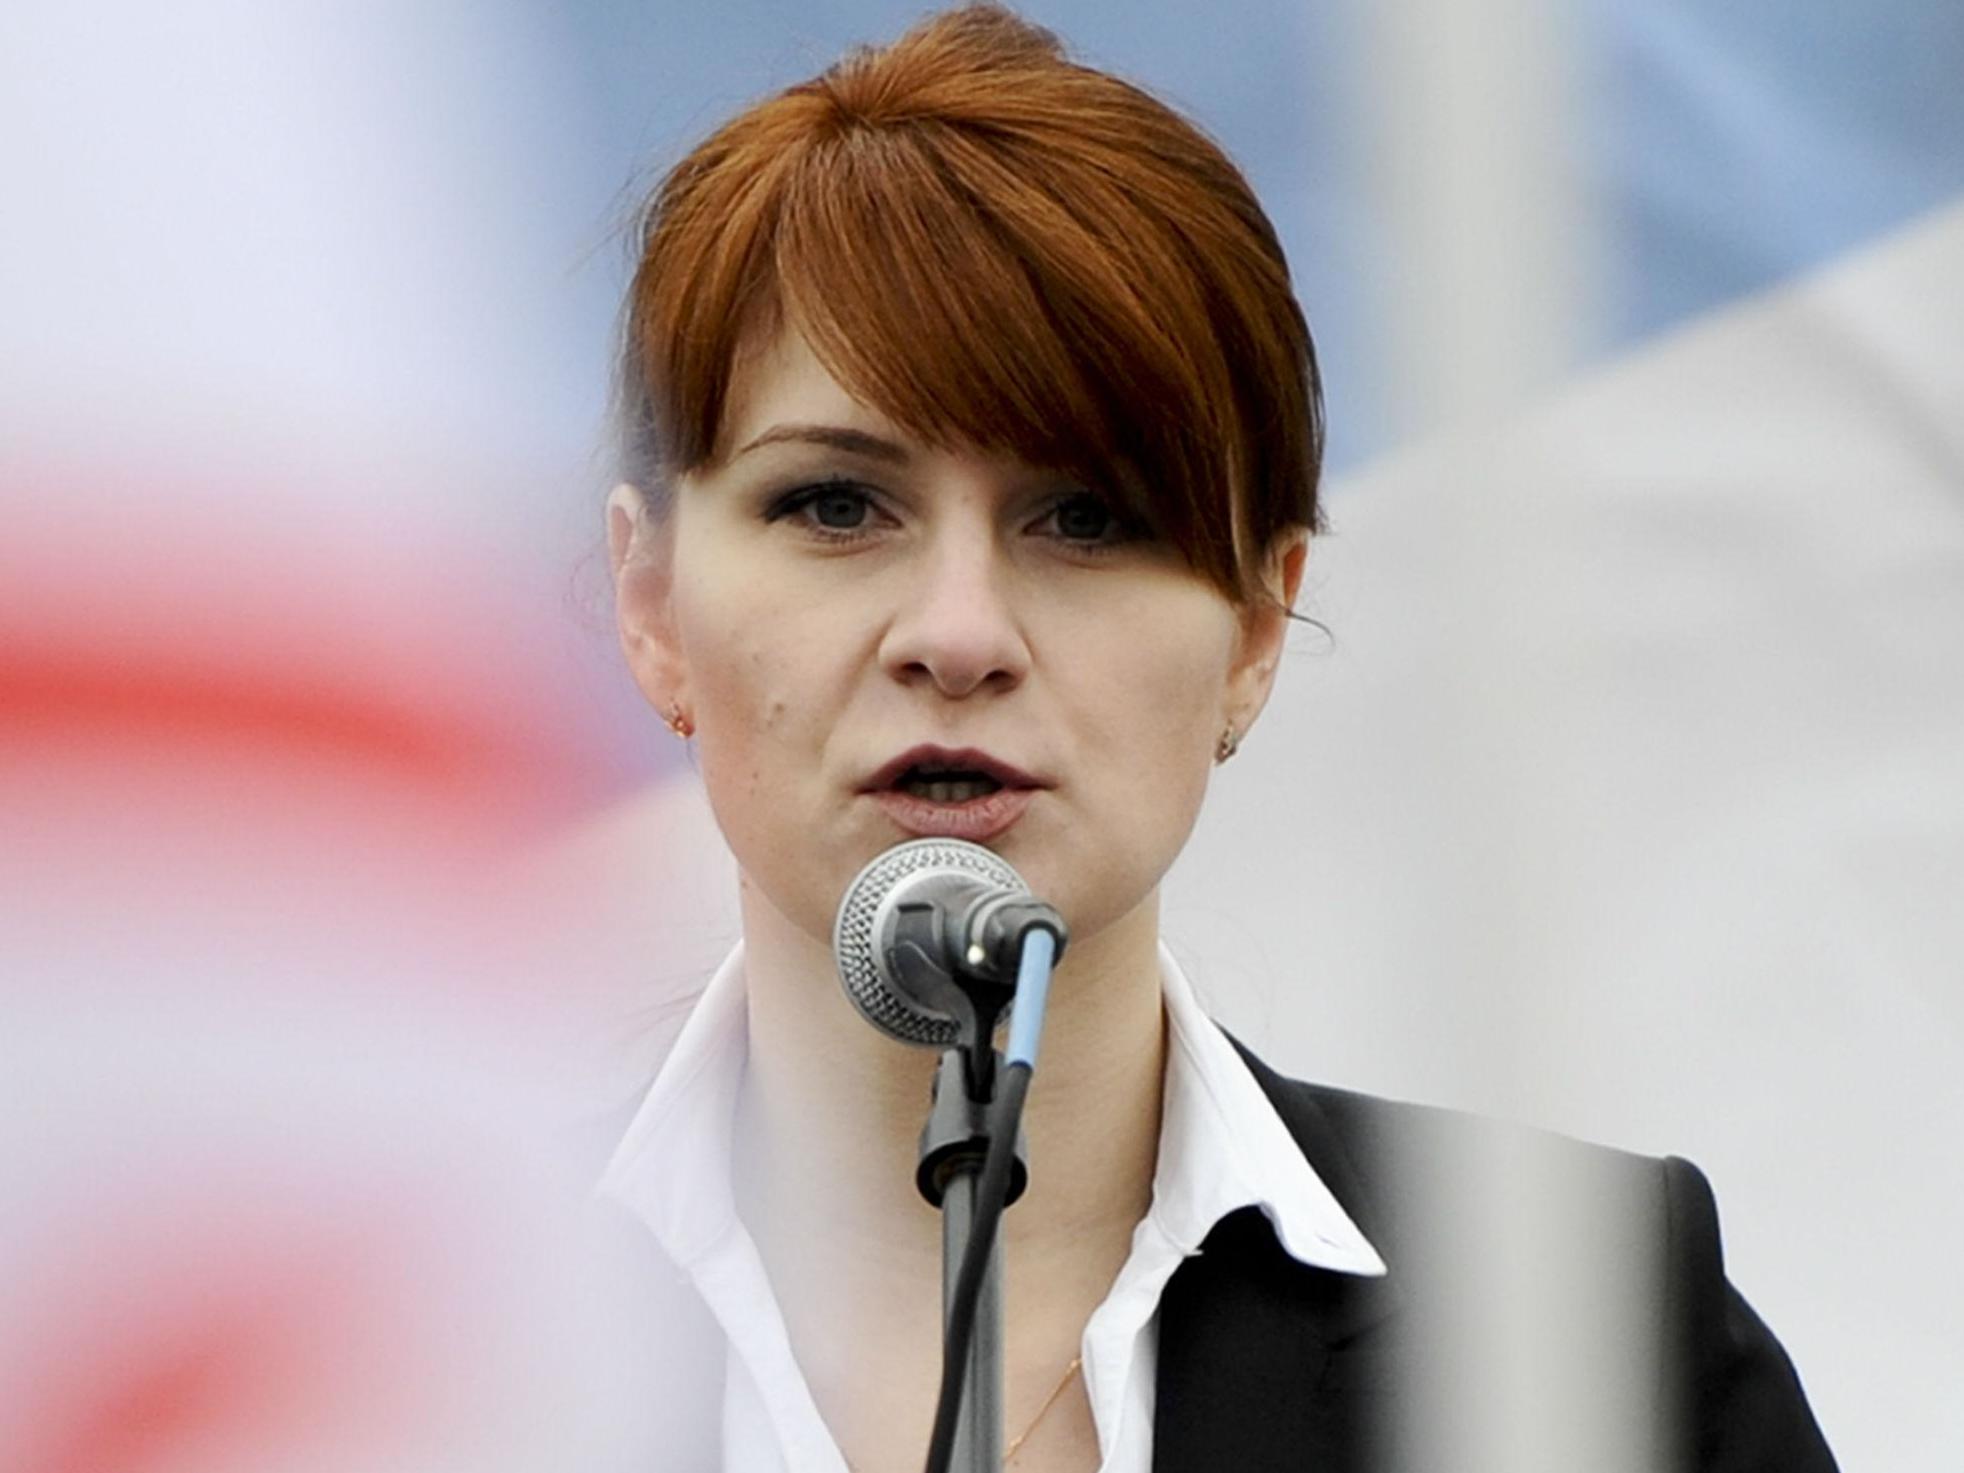 Maria Butina speaks to a crowd during a rally in support of legalising the possession of handguns in Moscow in 2013